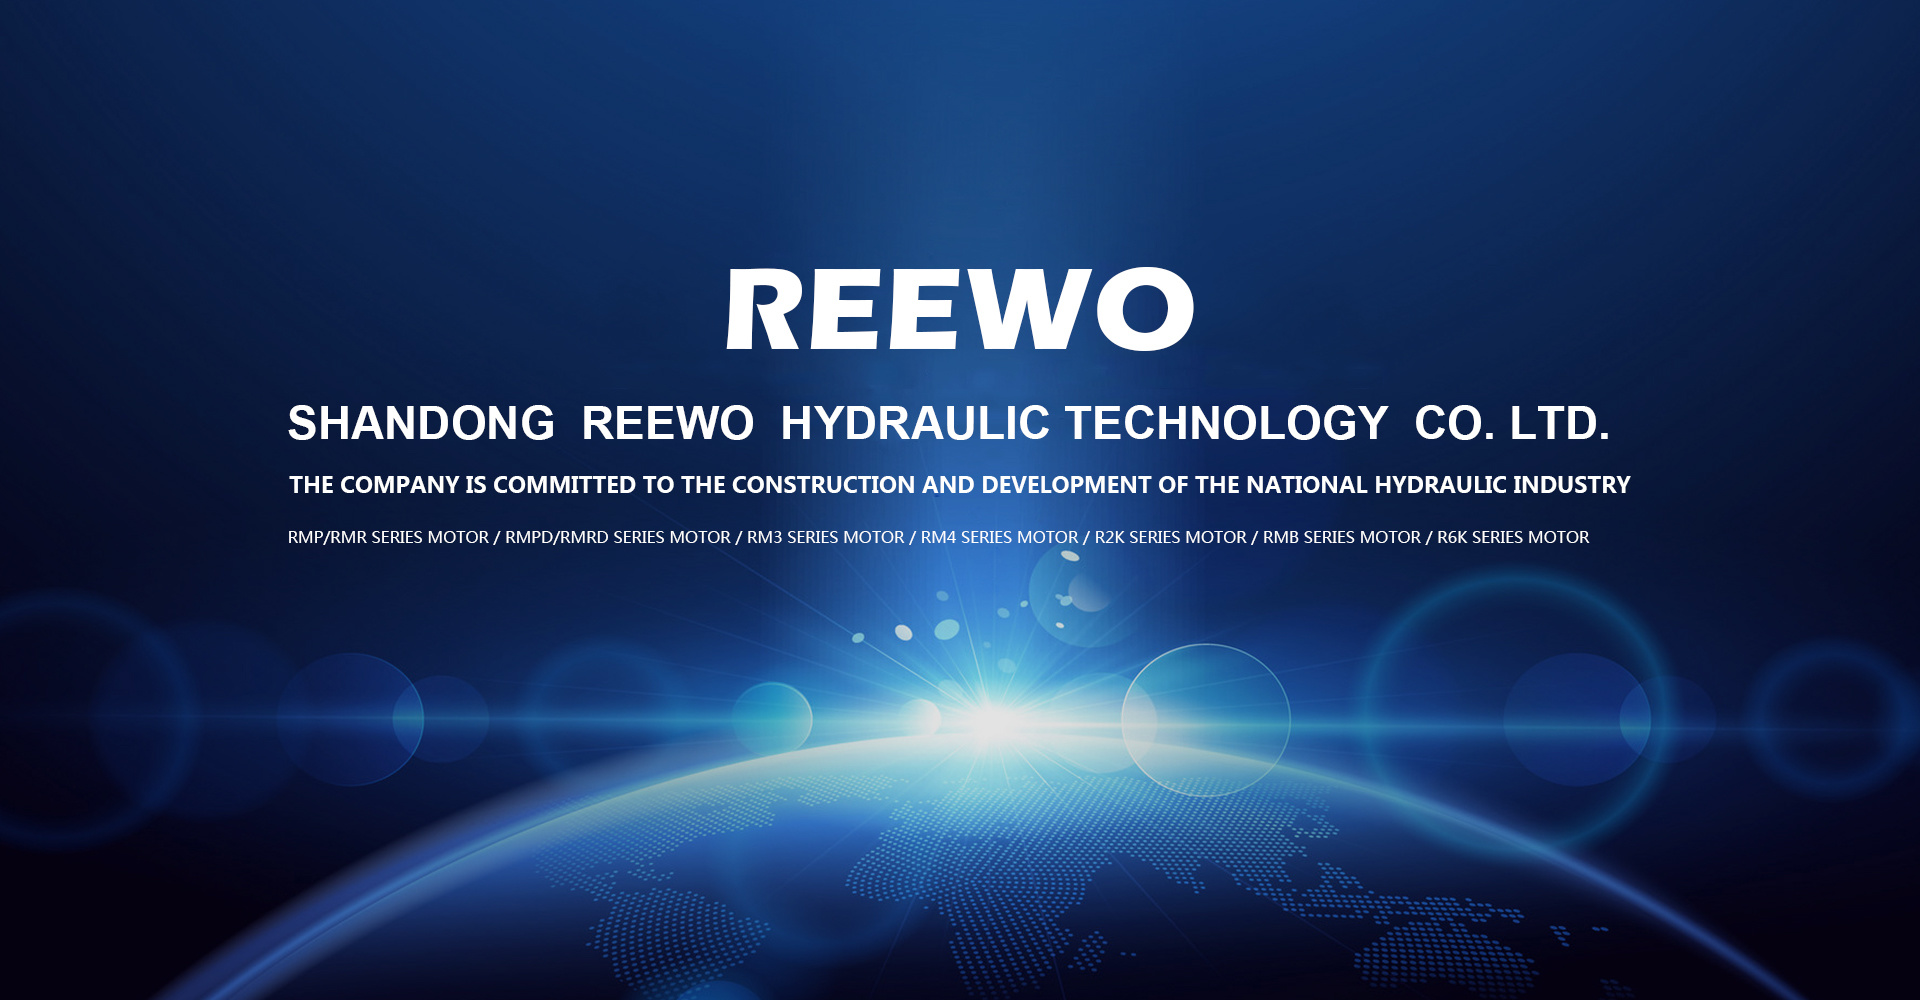 ReeWo can provide users with complete solutions for hydraulic equipment or systems